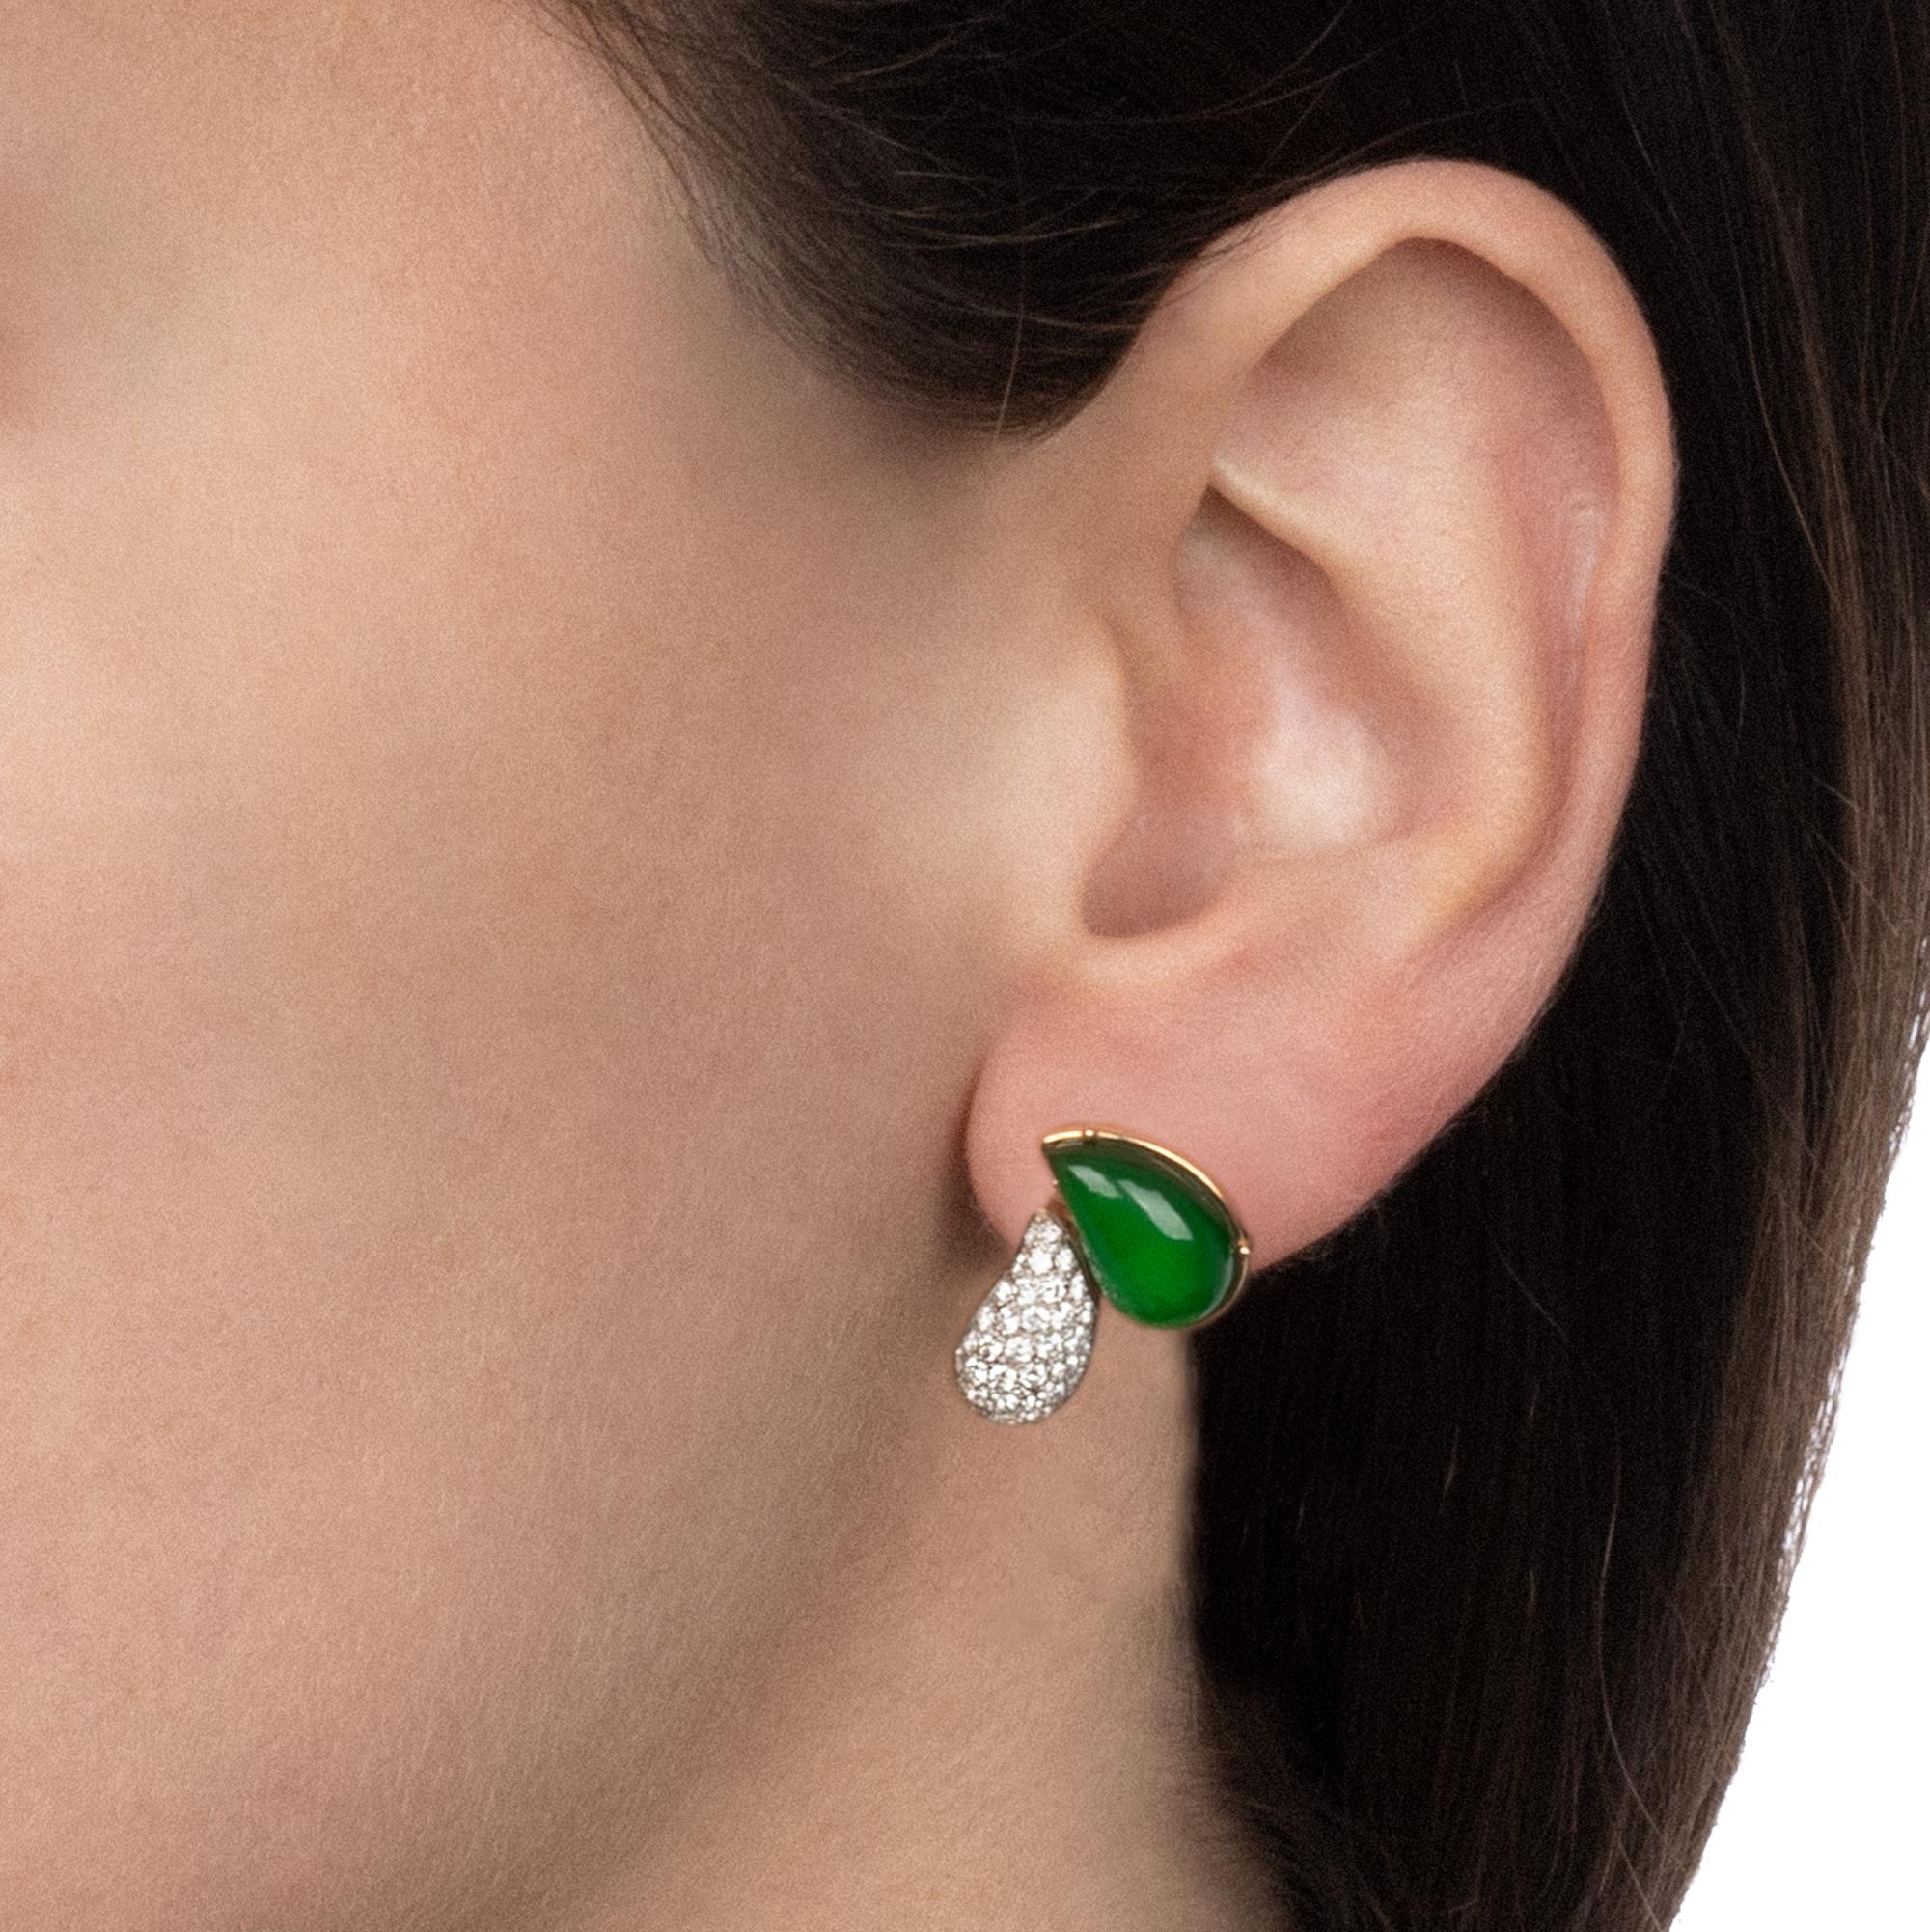 Fresh and playful like a summer memory, these earrings are classy and efferverscent at the same time. The bright green shade of the aventurine stone adds a touch of joyful elegance, while the diamonds accent add some sparkle. A set of handmade